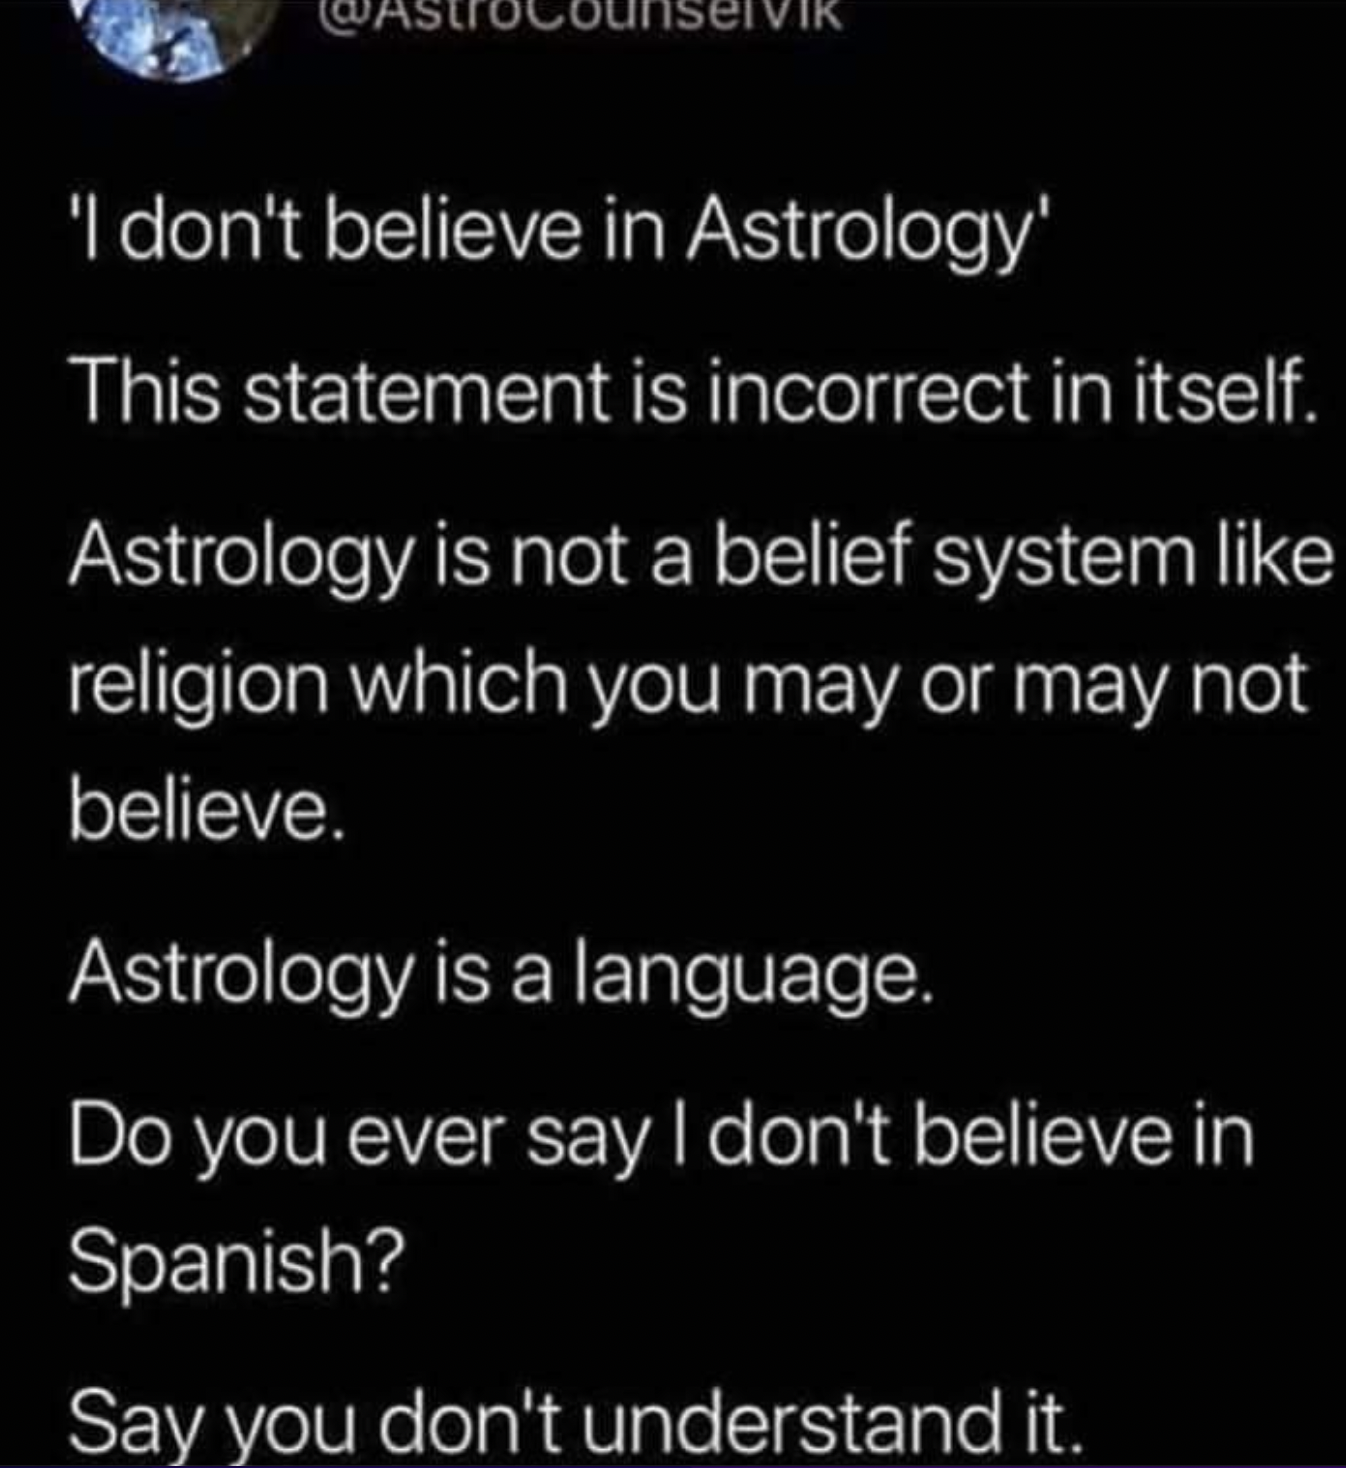 Confidently incorrect people - 'I don't believe in Astrology' This statement is incorrect in itself. Astrology is not a belief system religion which you may or may not believe. Astrology is a language. Do you ever say I don't believe in Spanish? Say you d